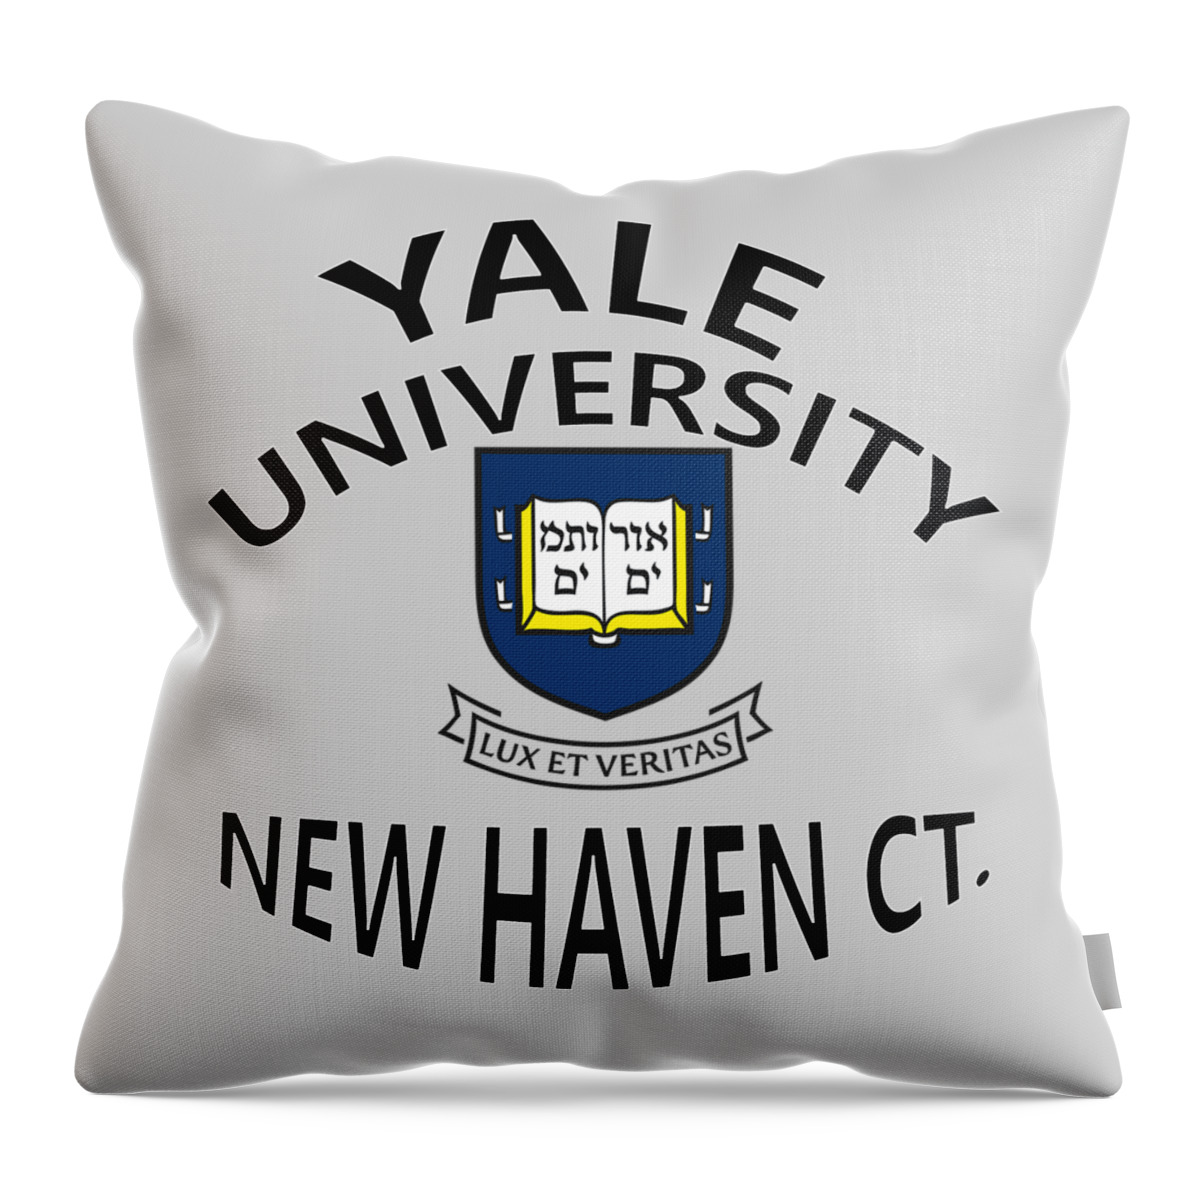 Yale University Throw Pillow featuring the digital art Yale University New Haven Connecticut by Movie Poster Prints